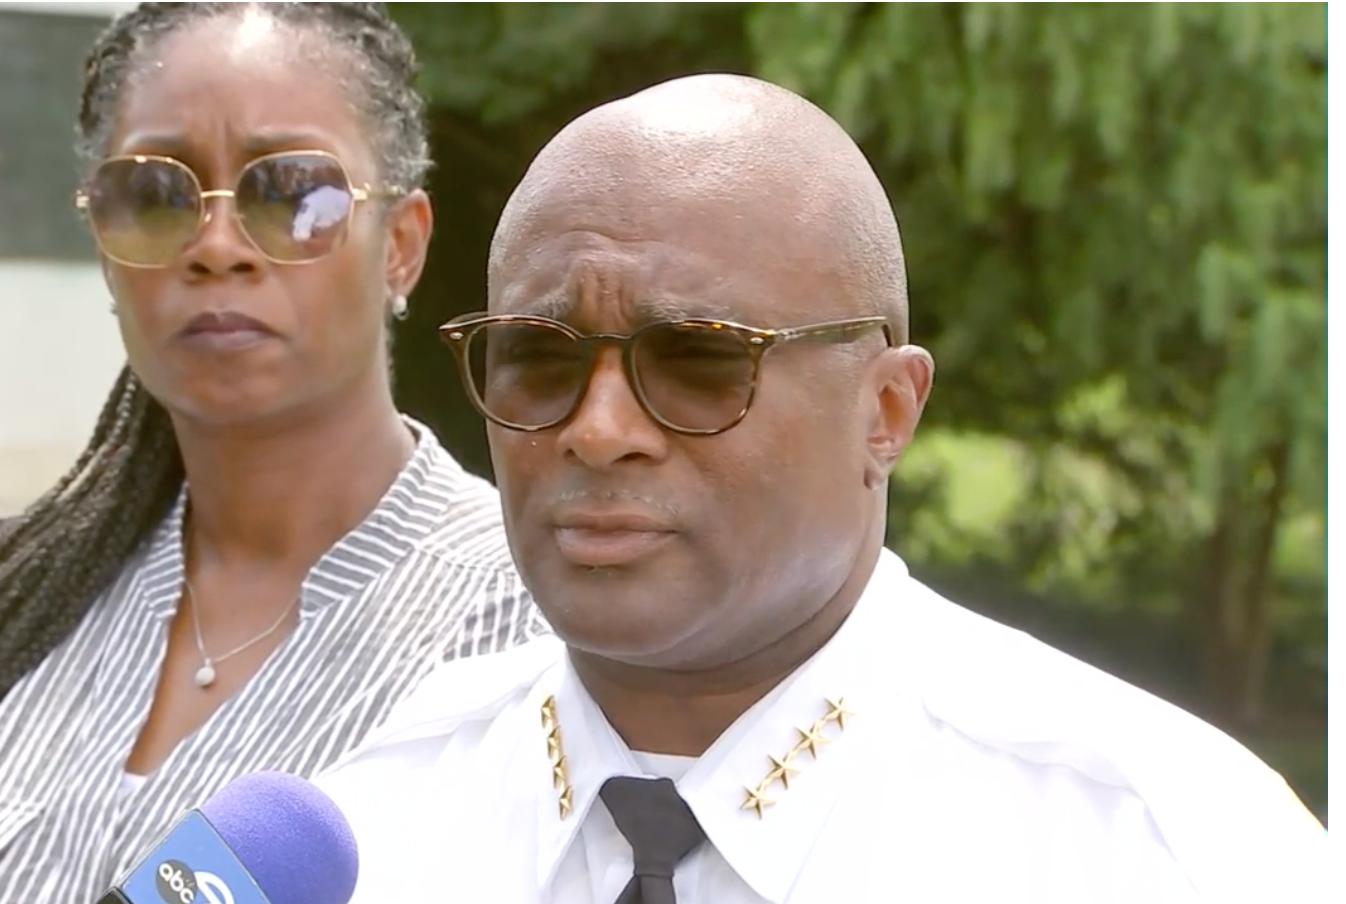 Bladensburg Police Department chief Tyrone Collington gave further details about a mass shooting in the Maryland shooting on Friday